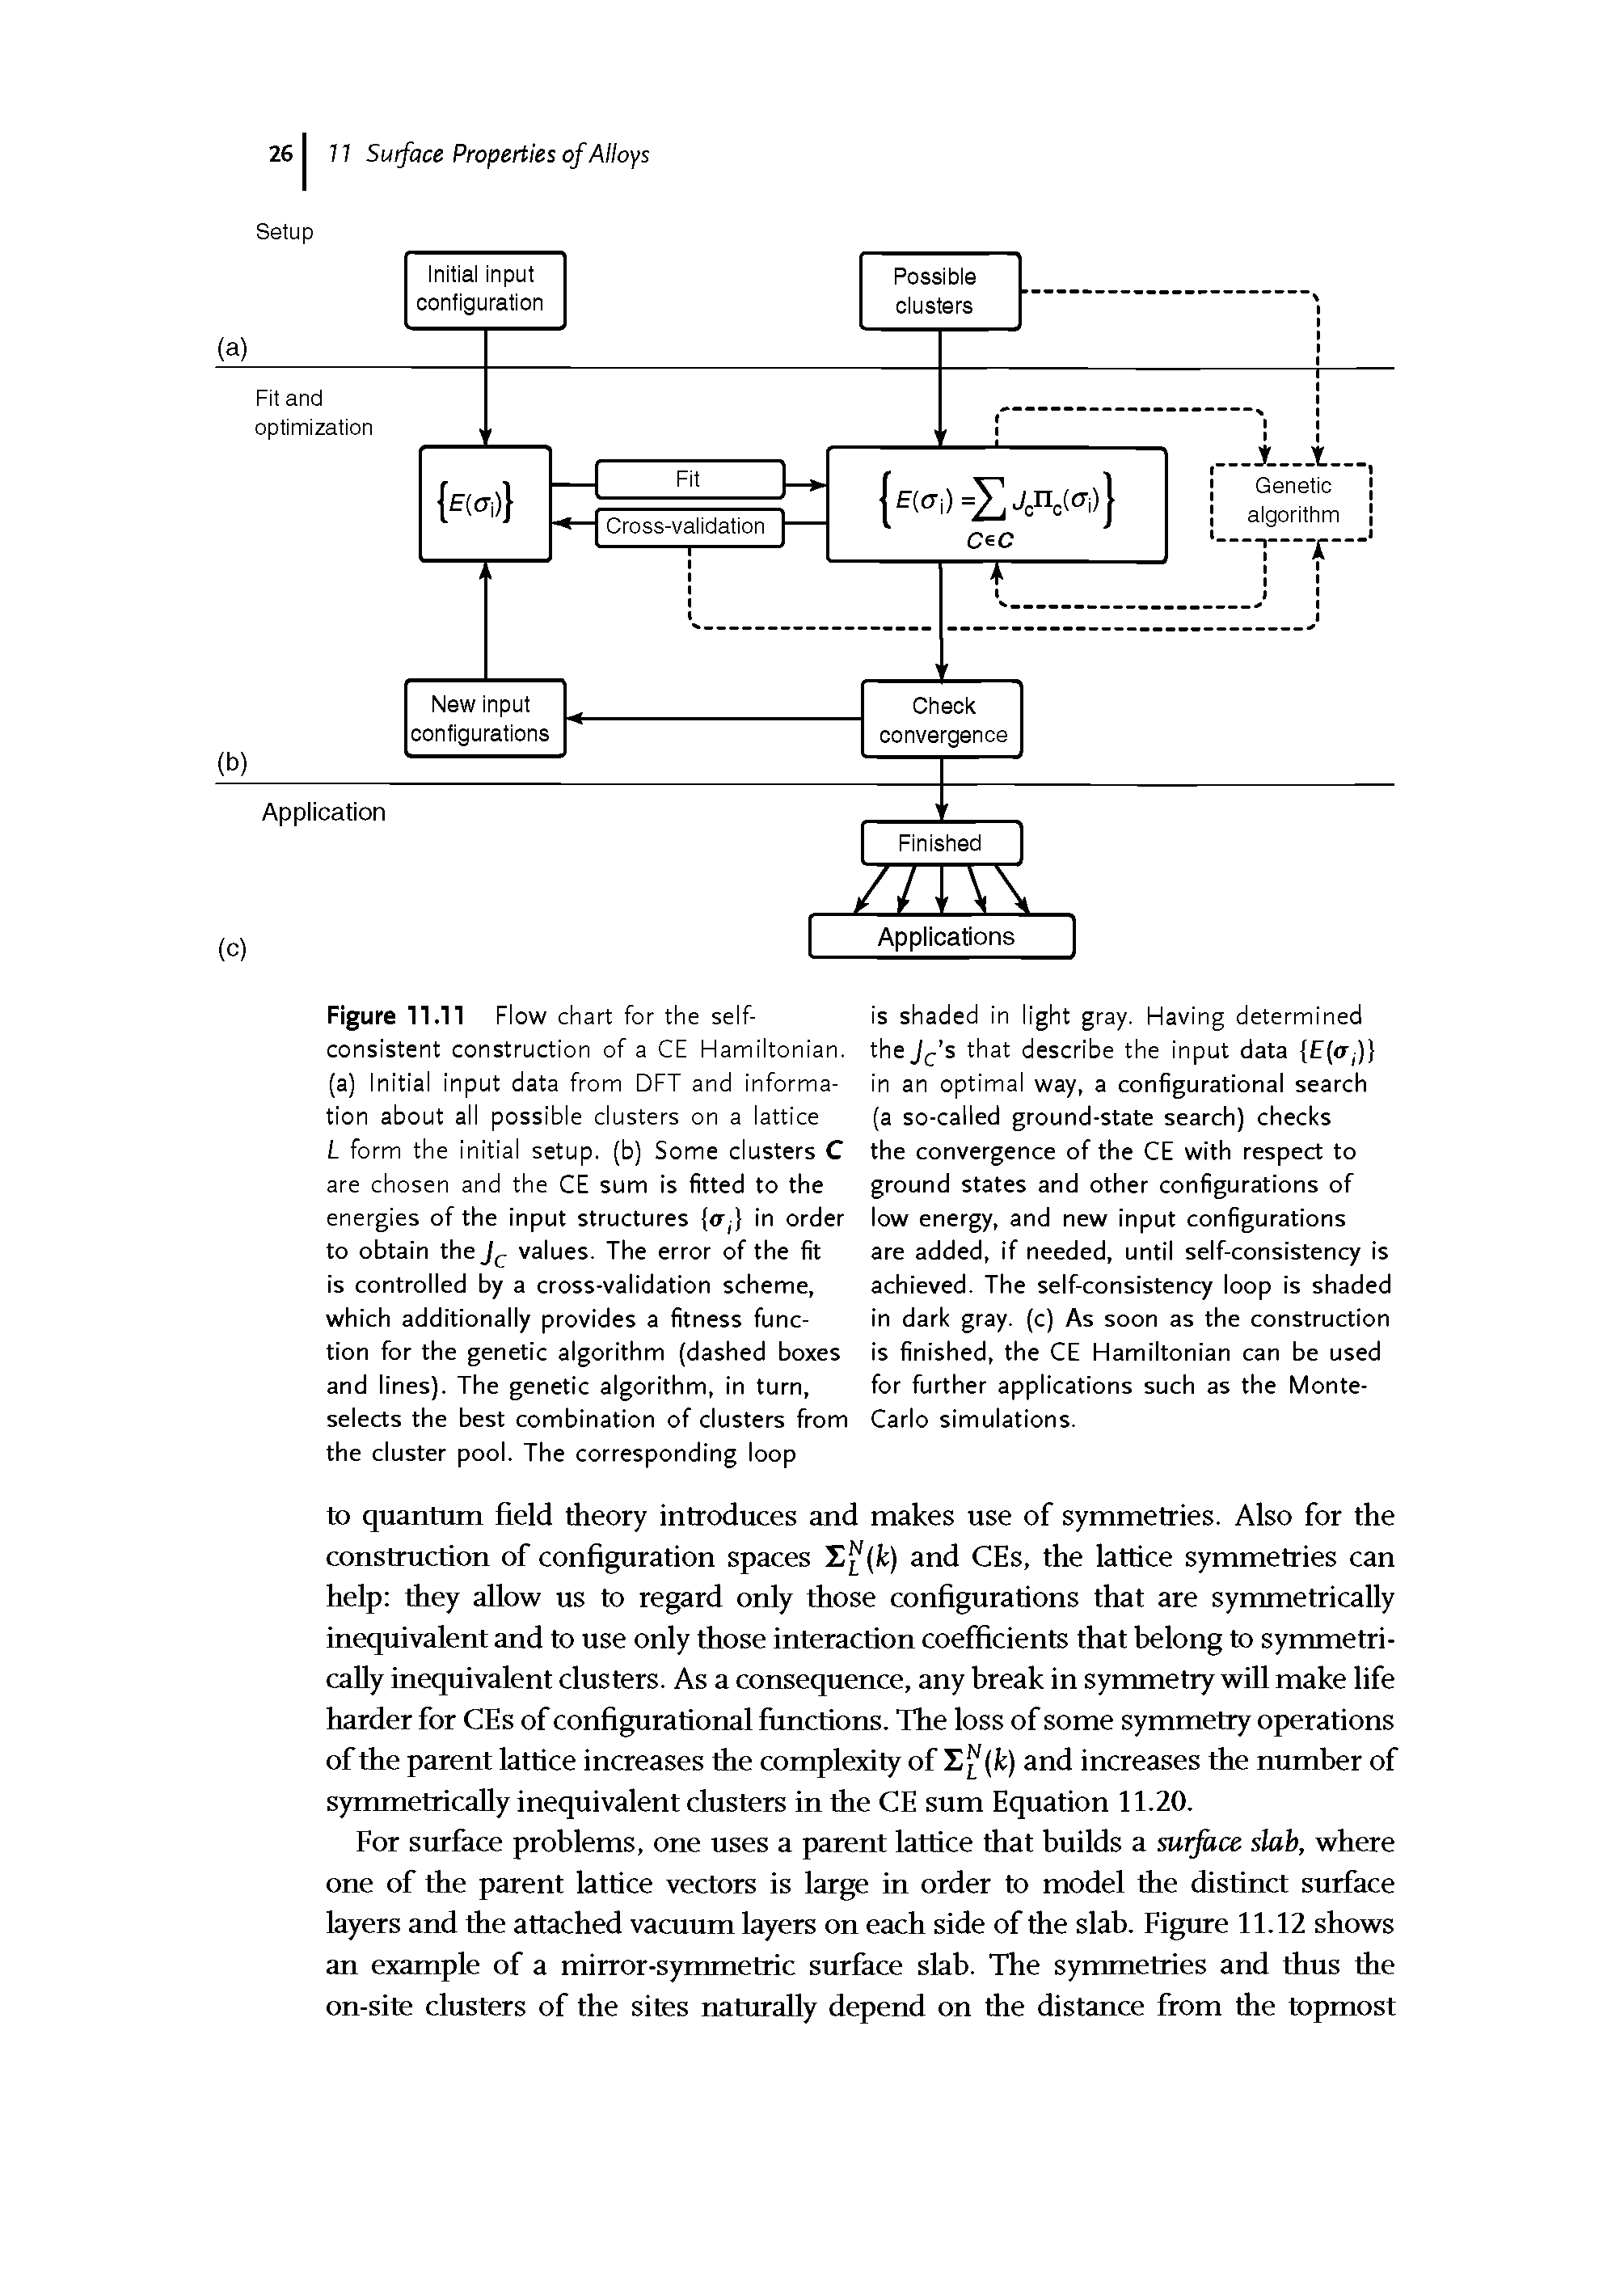 Figure 11.11 Flow chart for the self-consistent construction of a CE Hamiltonian, (a) Initial input data from DFT and information about all possible clusters on a lattice L form the initial setup, (b) Some clusters C are chosen and the CE sum is fitted to the energies of the input structures <r, in order to obtain the values. The error of the fit is controlled by a cross-validation scheme, which additionally provides a fitness function for the genetic algorithm (dashed boxes and lines). The genetic algorithm, in turn, selects the best combination of clusters from the cluster pool. The corresponding loop...